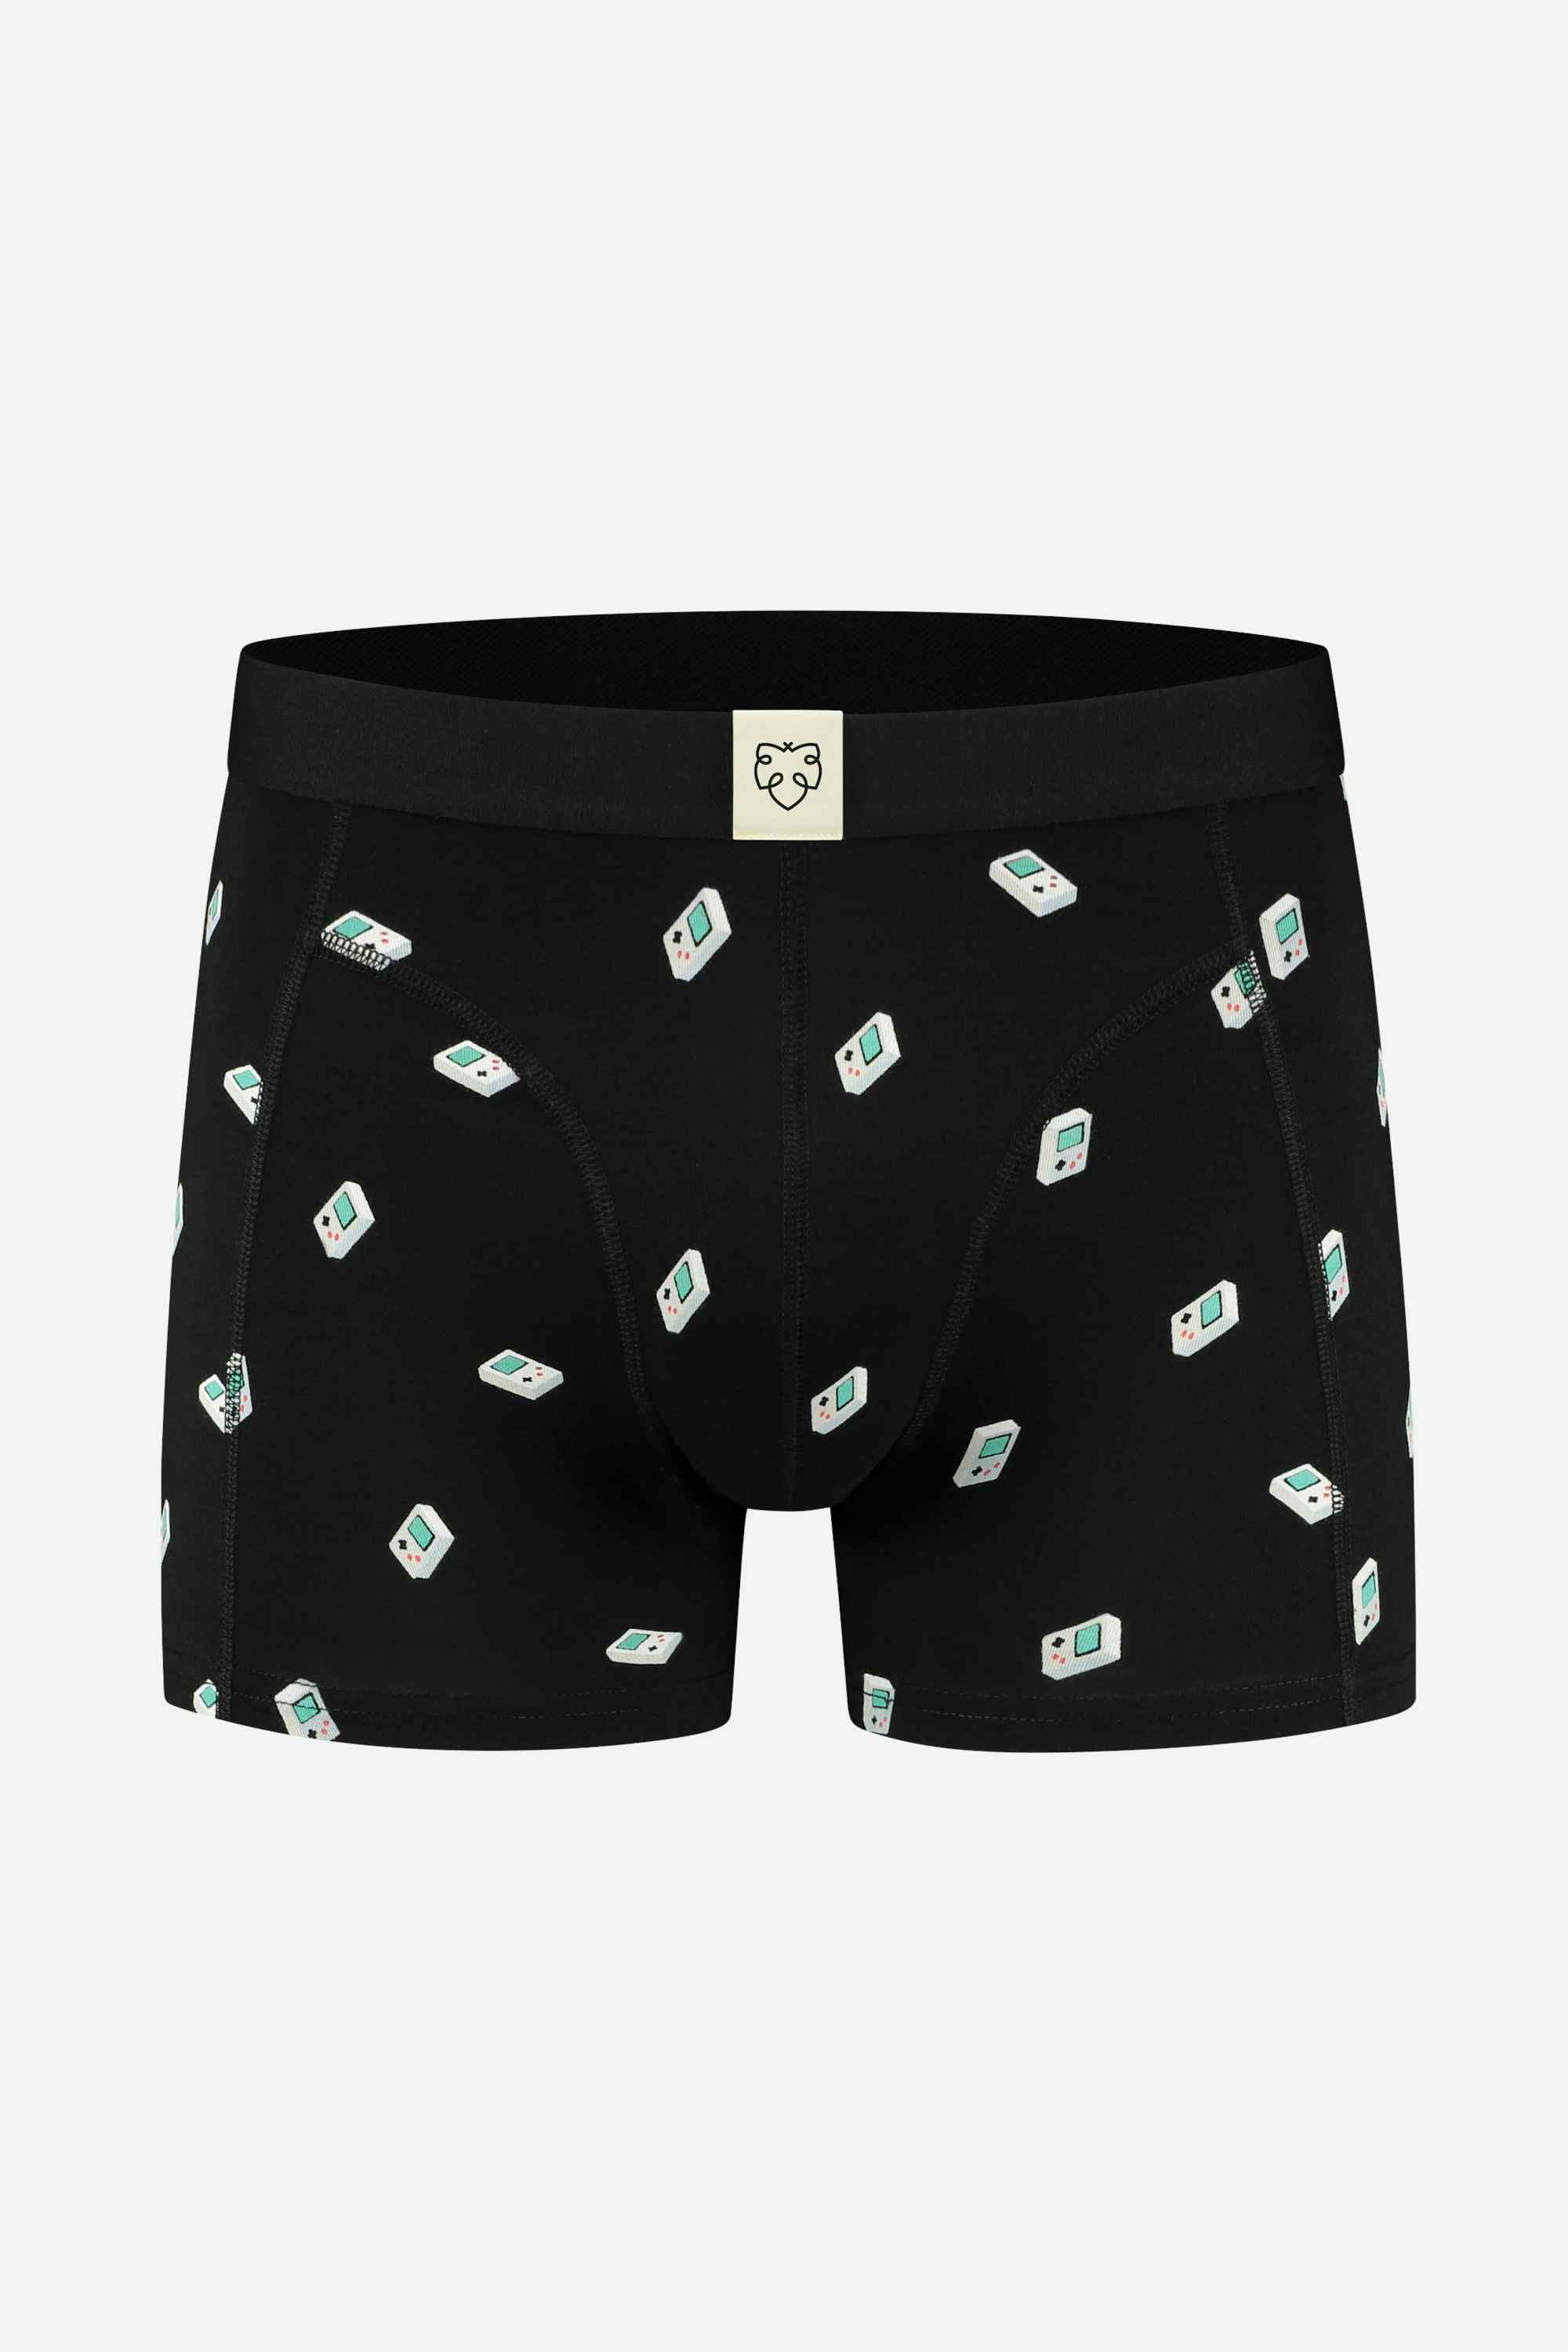 A-dam Black boxer brief with game boy from GOTS pure organic cotton